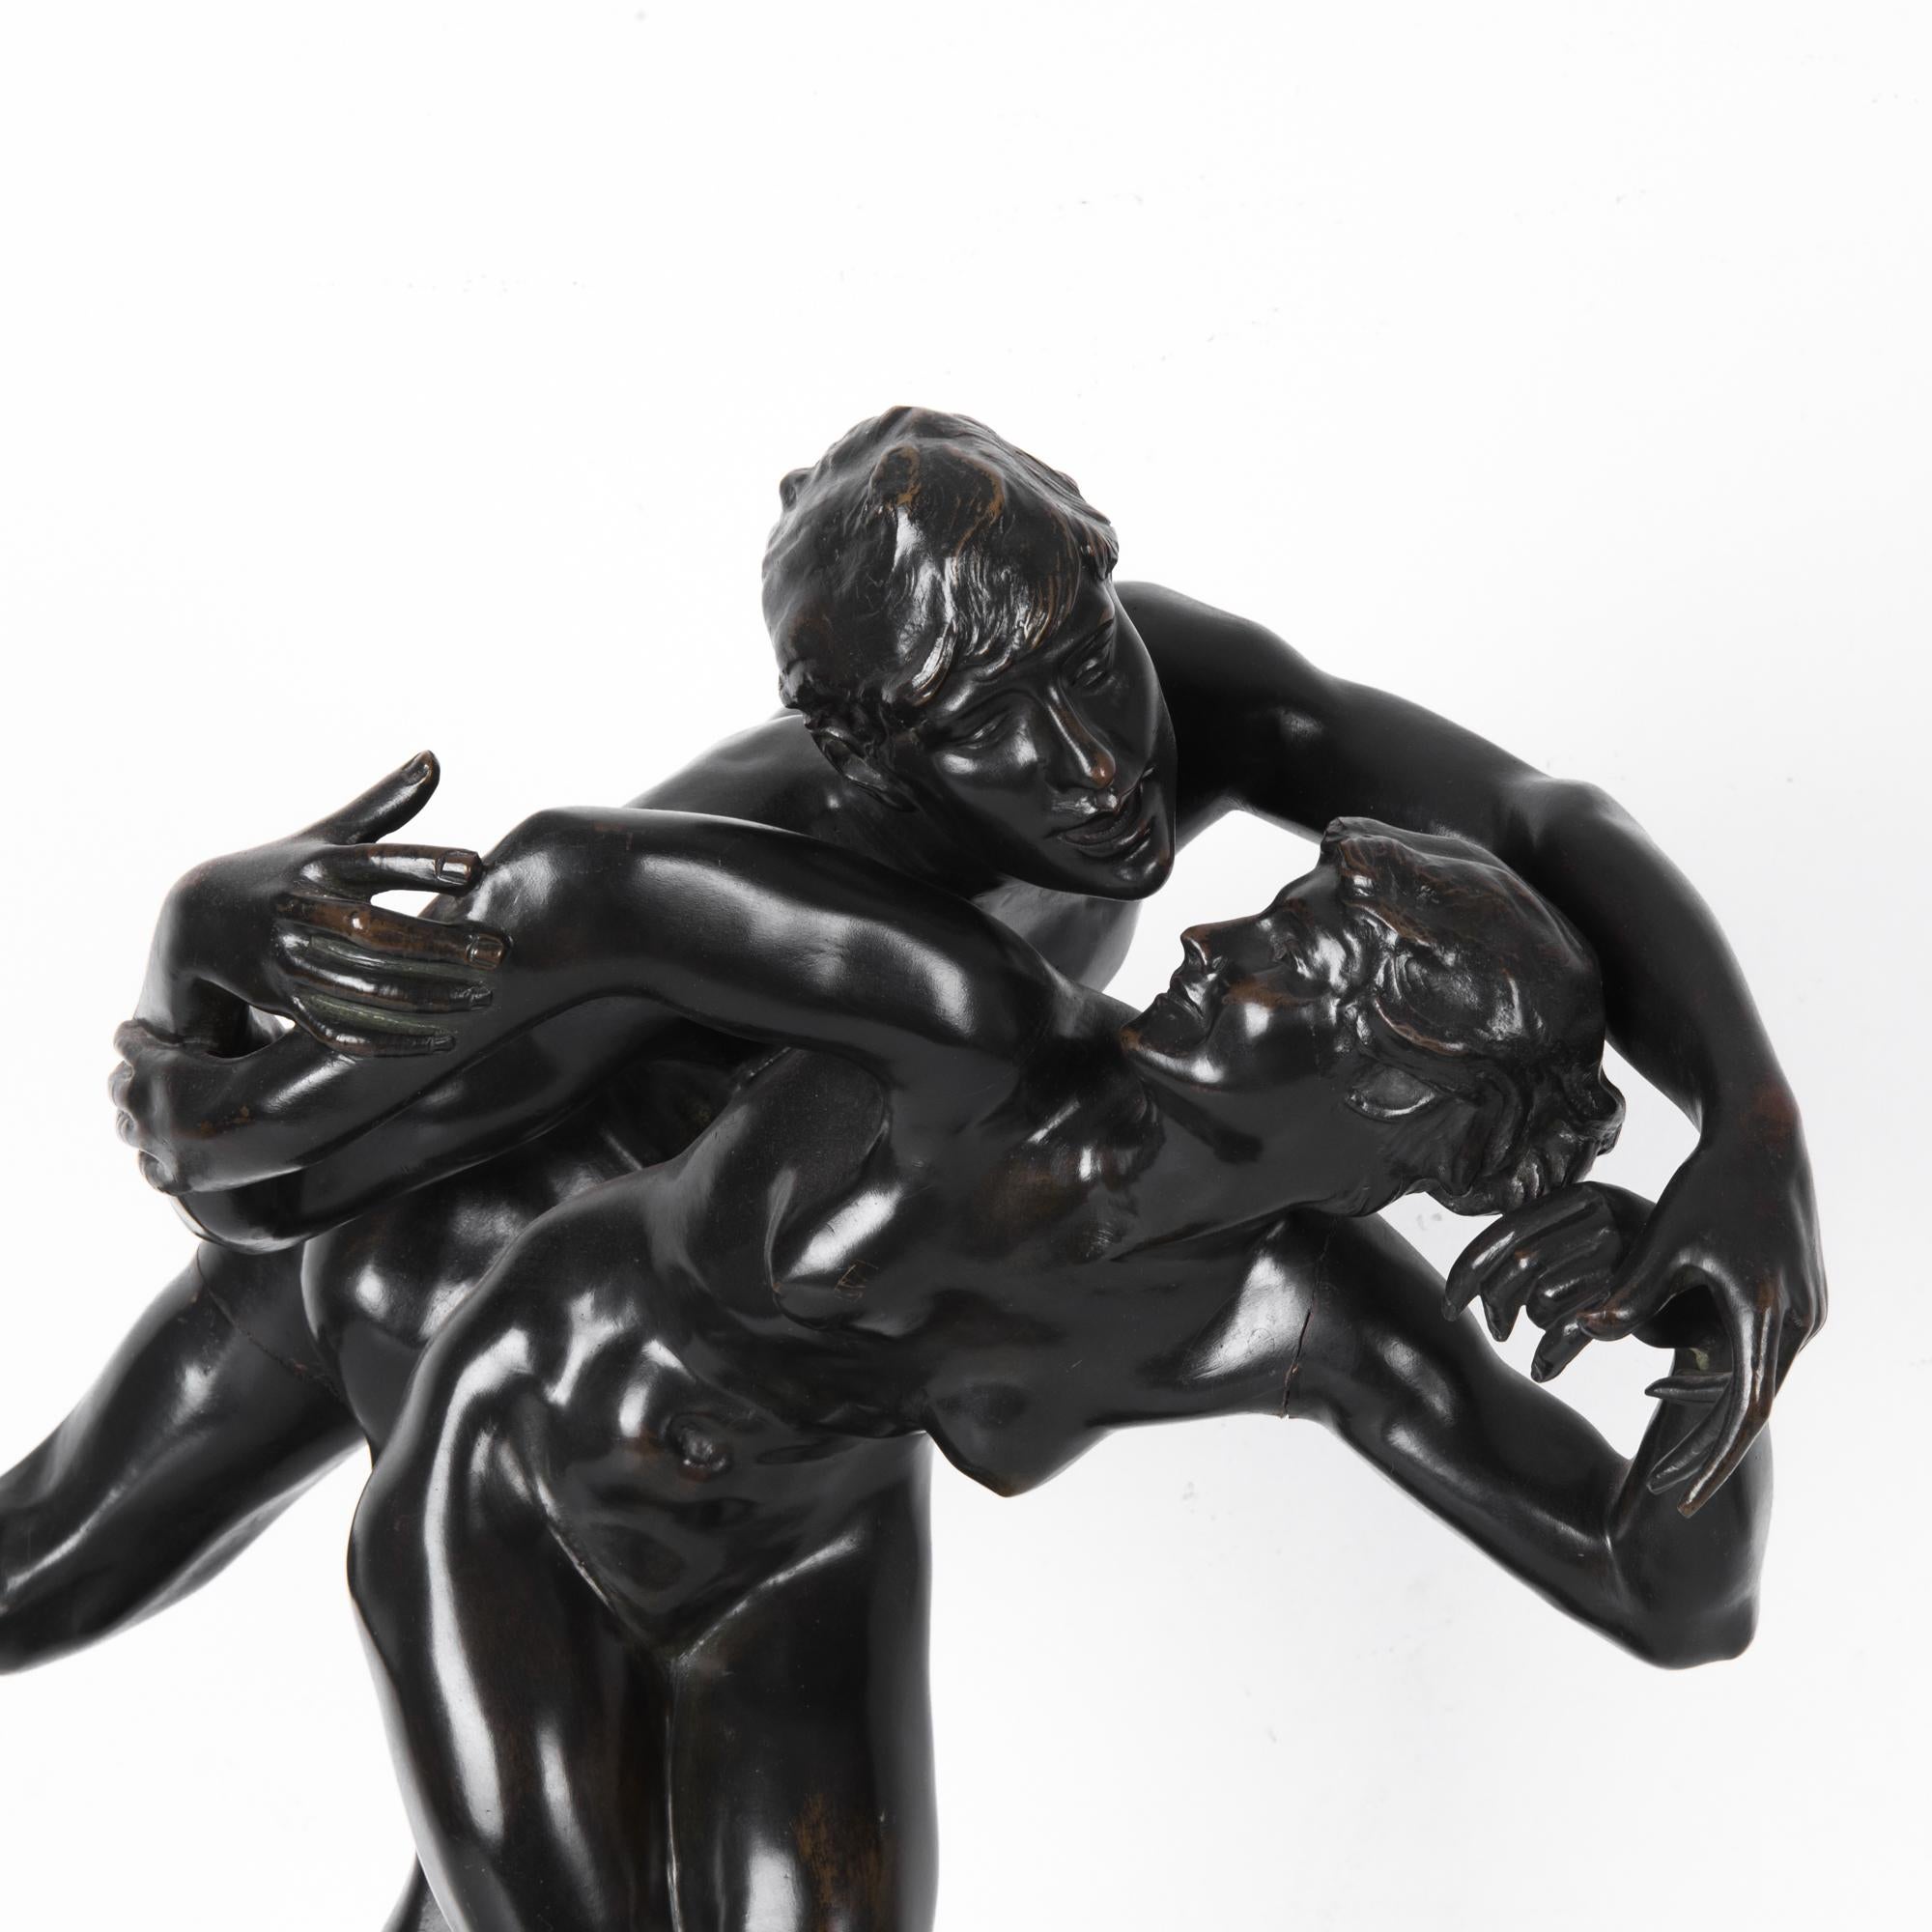 A figurative bronze sculpture by J. Lambeux from turn of the century, Belgium. A man and a woman whirl in a dynamic, mobile gesture. A rich and evocative finish, the bronze is so dark it is almost black. The glossy polish emphasizes the elegant